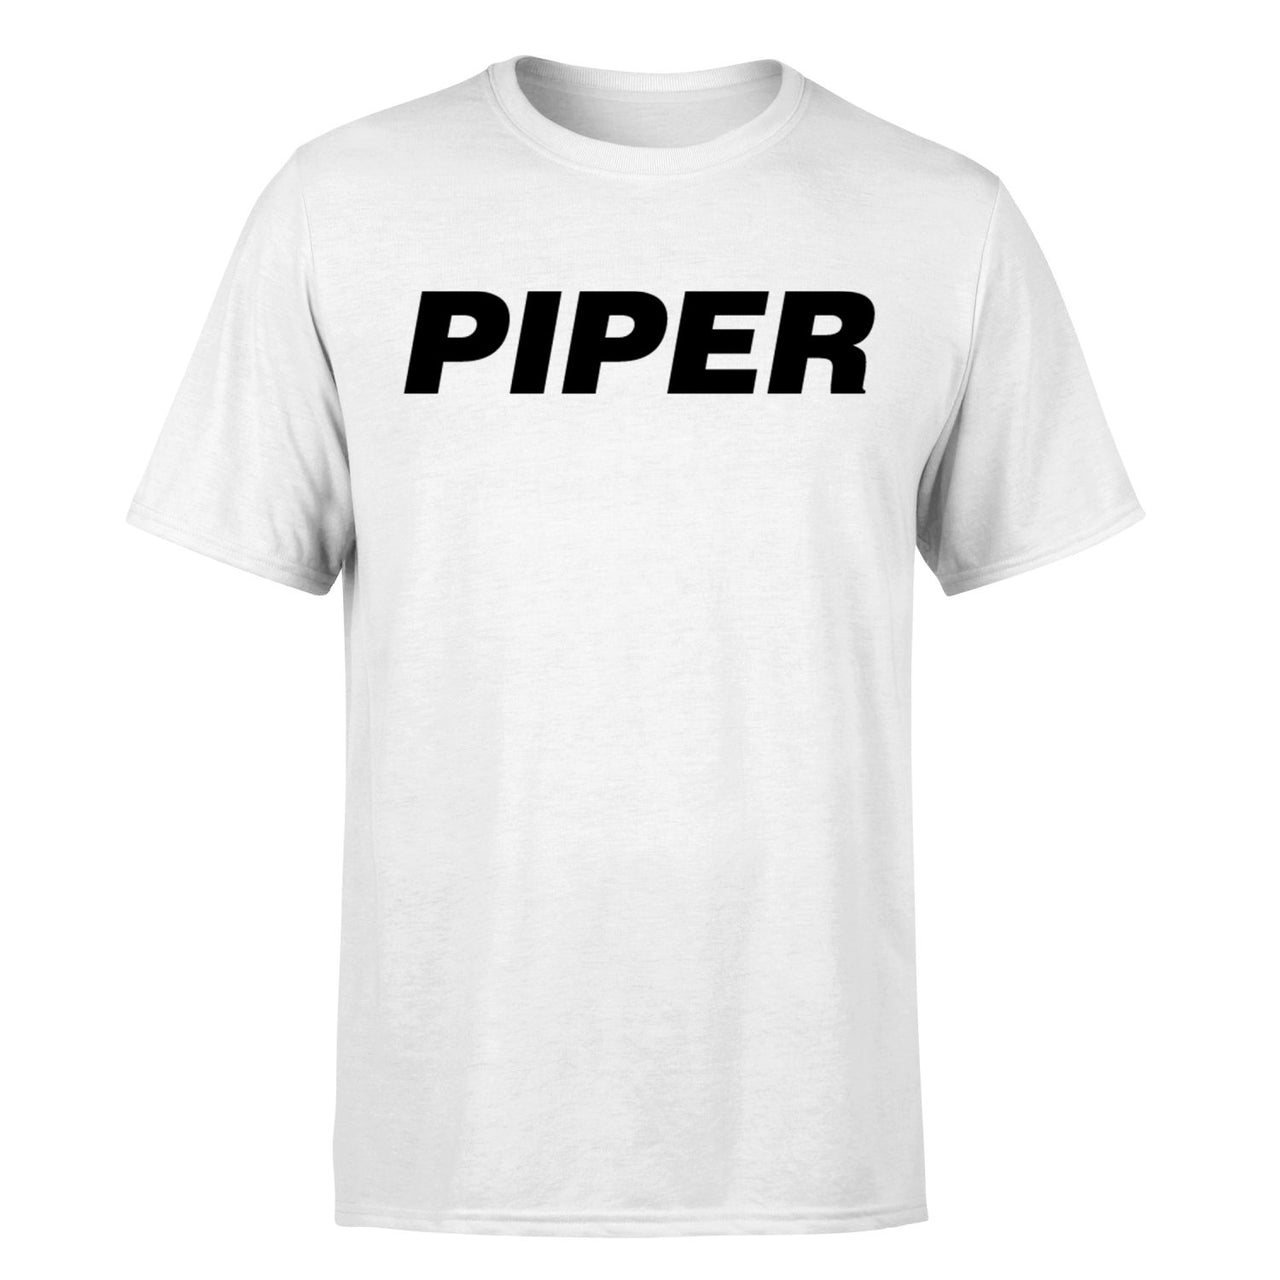 Piper & Text Designed T-Shirts